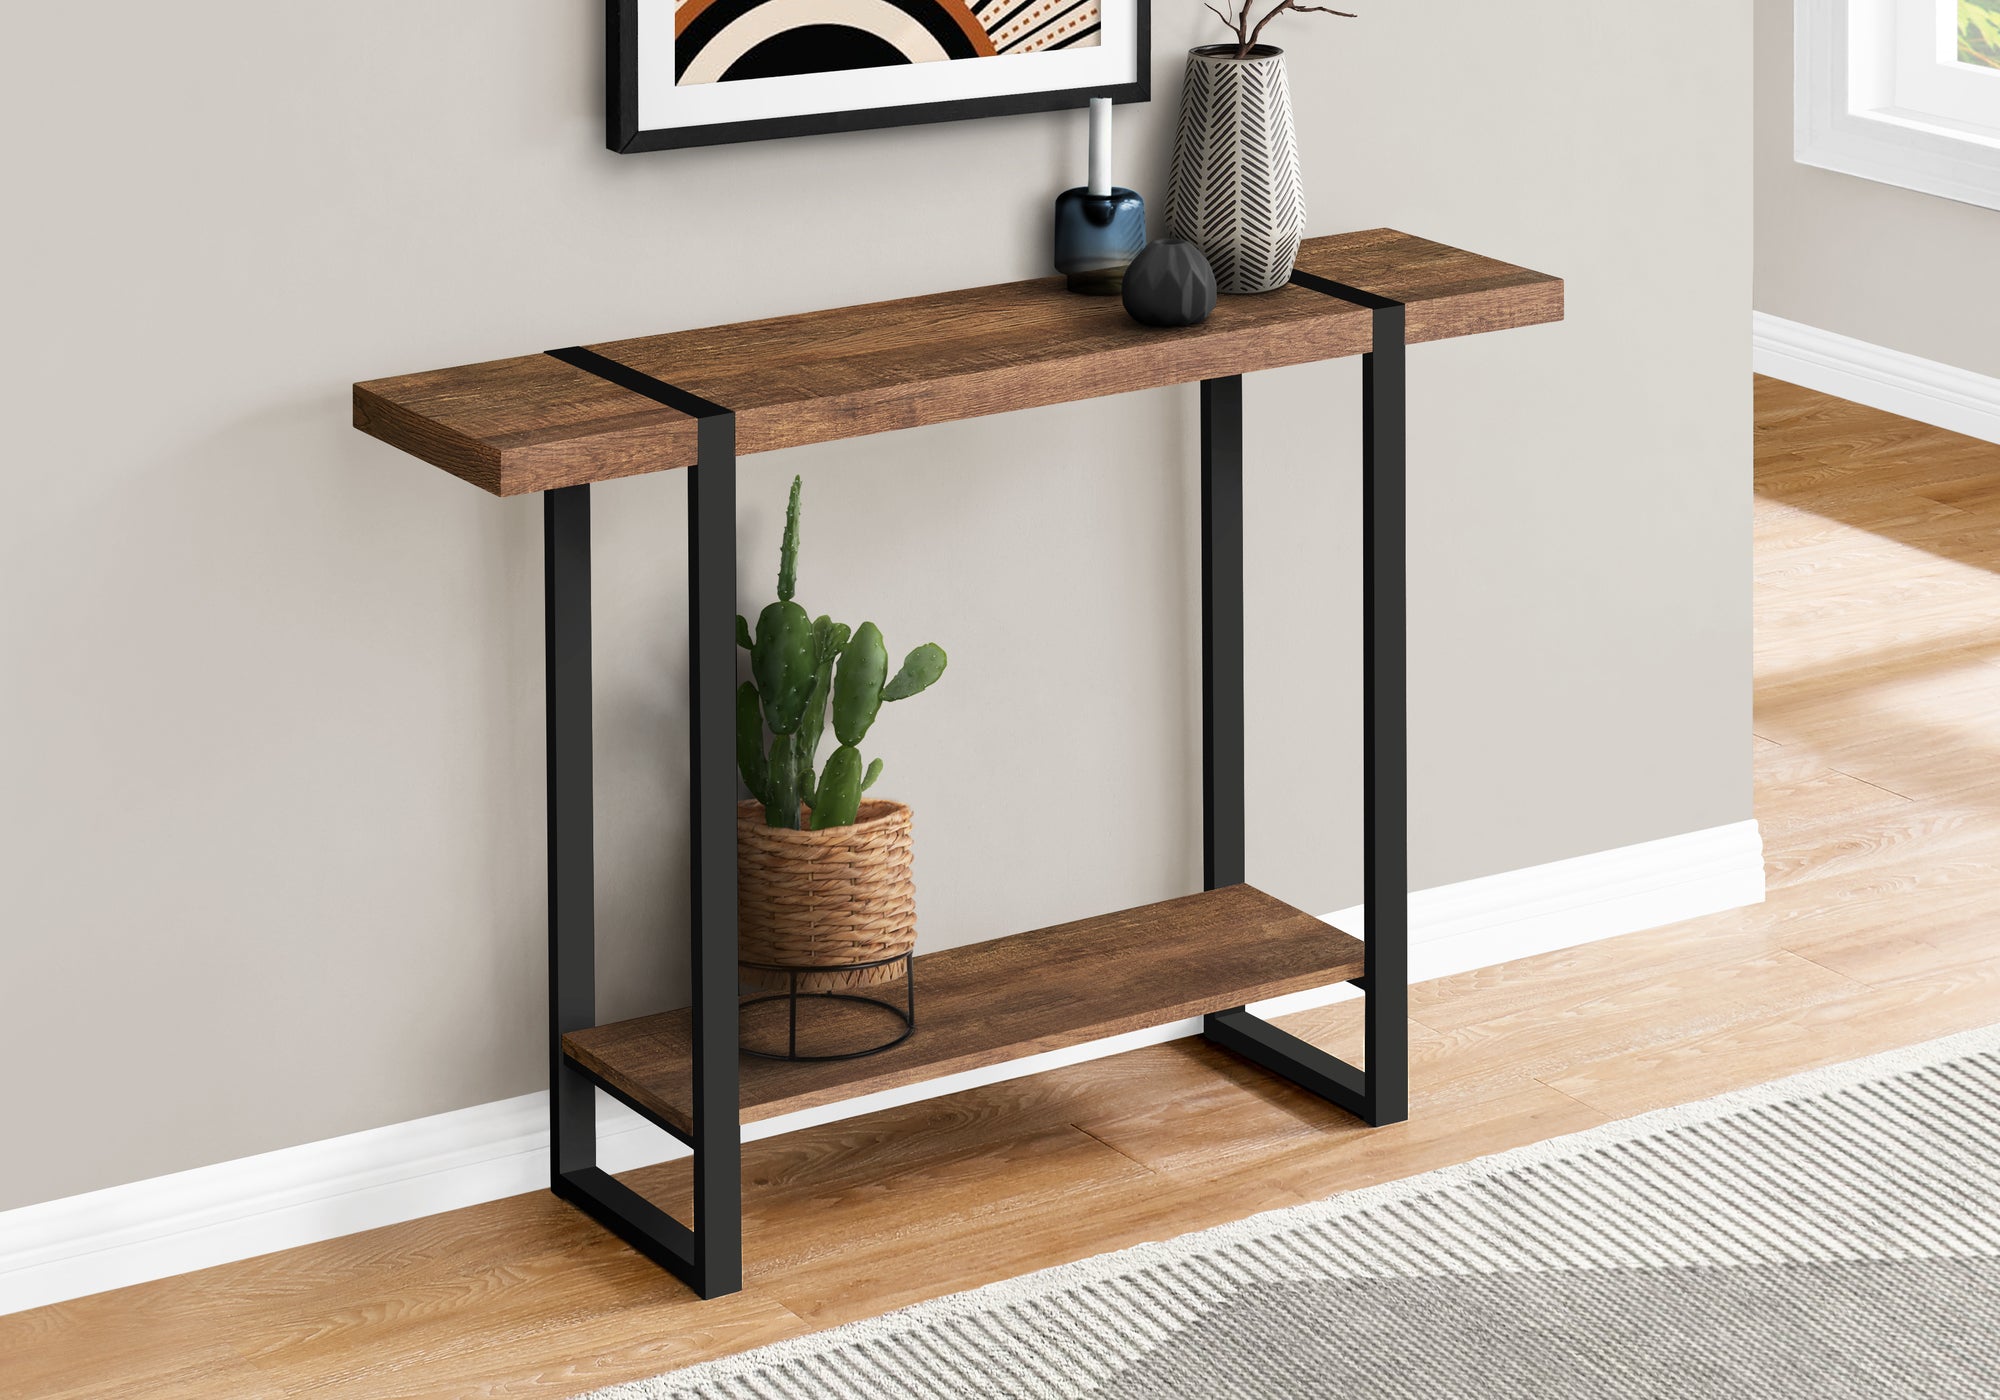 MN-562851    Accent Table, Console, Entryway, Narrow, Sofa, Living Room, Bedroom, Metal Legs, Laminate, Brown Reclaimed Wood Look, Black, Contemporary, Industrial, Modern